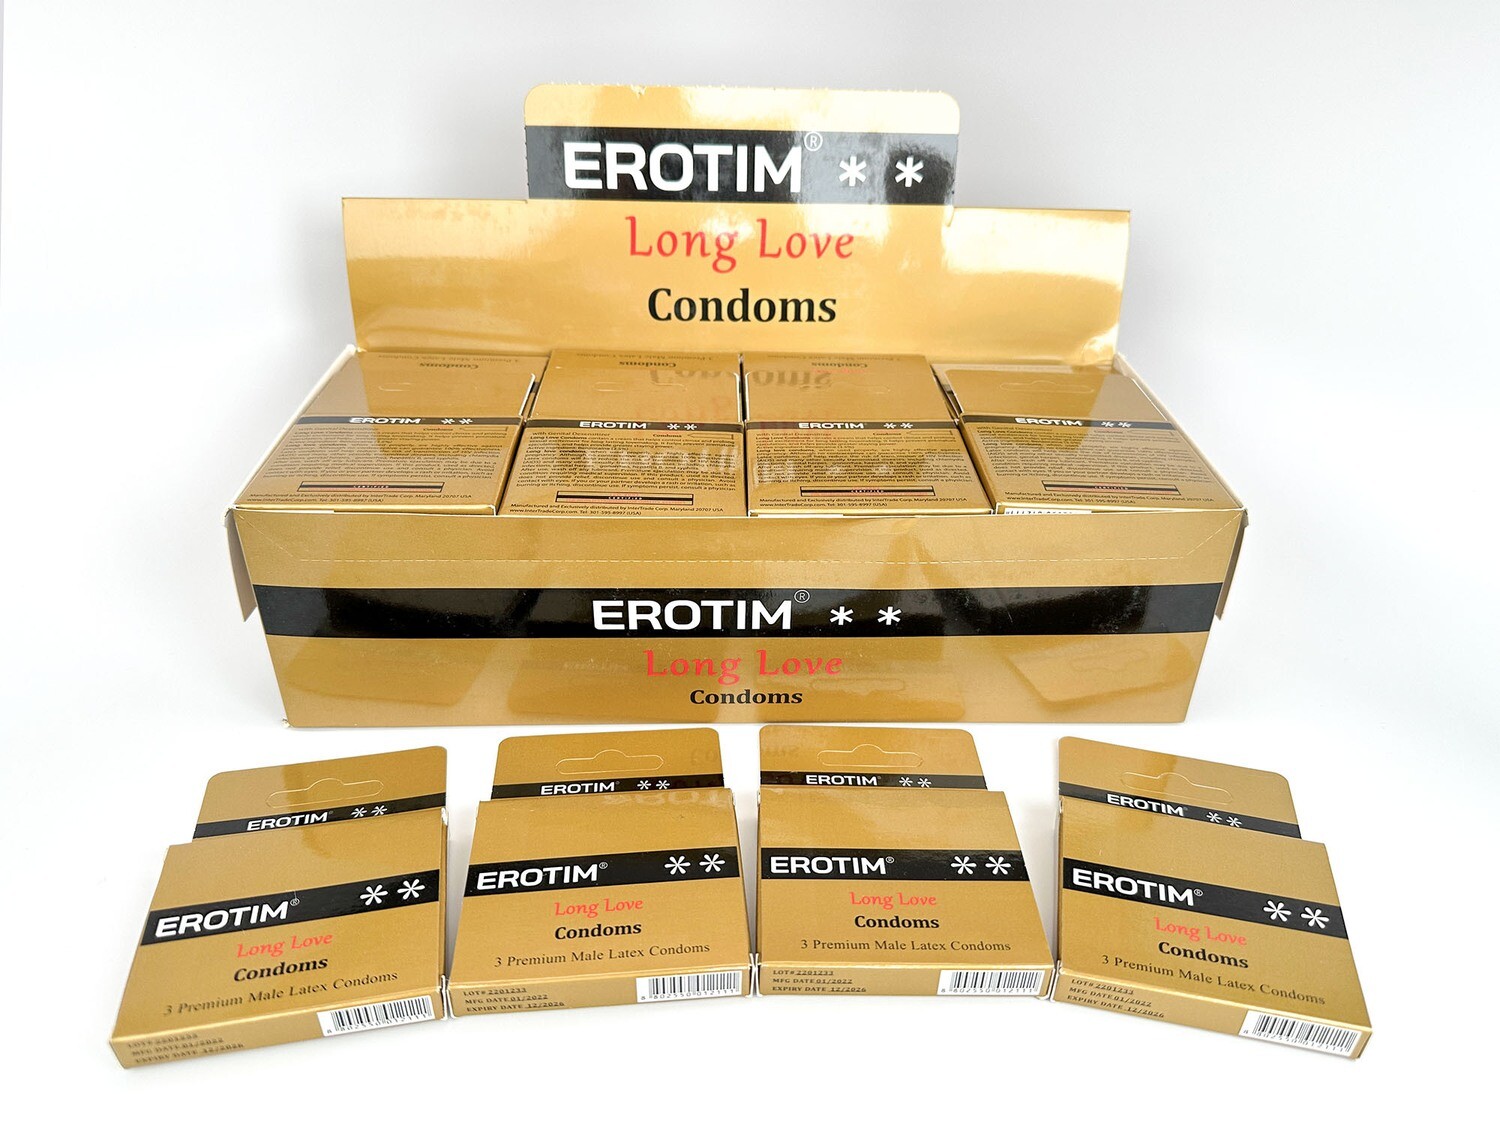 Wholesale - Long Love® Erotim® Condom Gold Packing - Lot of 30 display cases (each containing 144 condoms) - Total 4,320 condoms